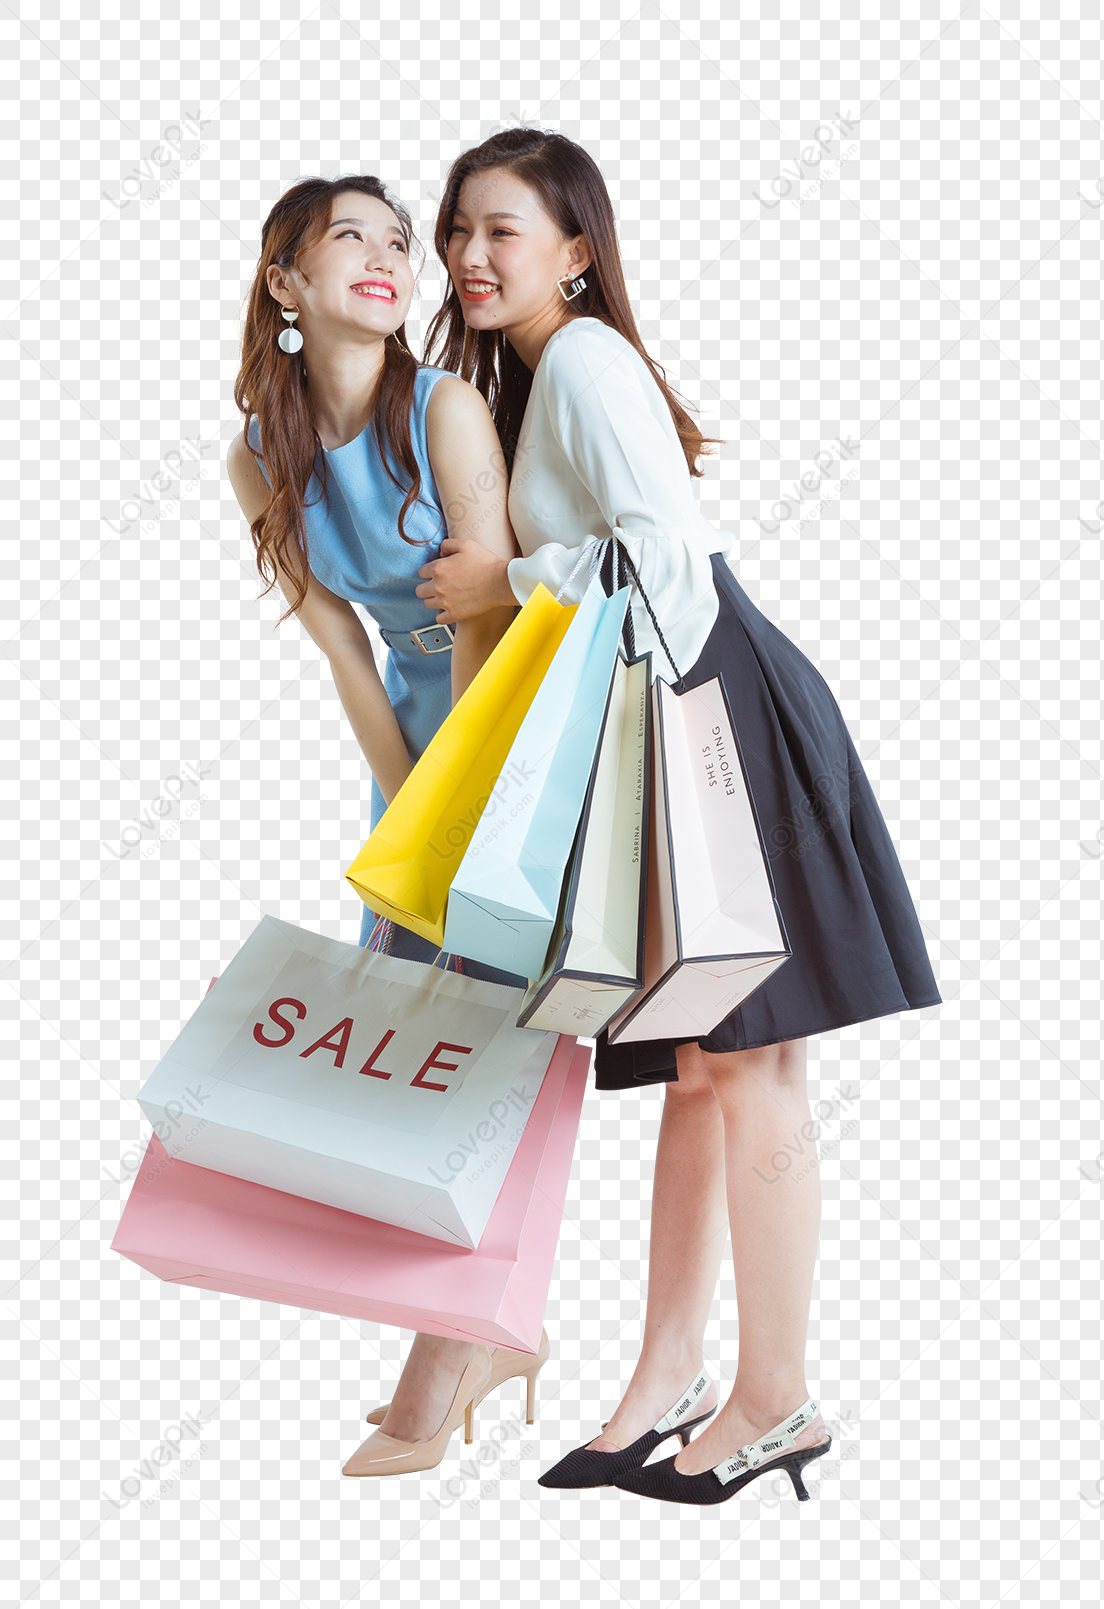 Girlfriends Shopping Bags Shopping Bags PNG Image Free Download And ...